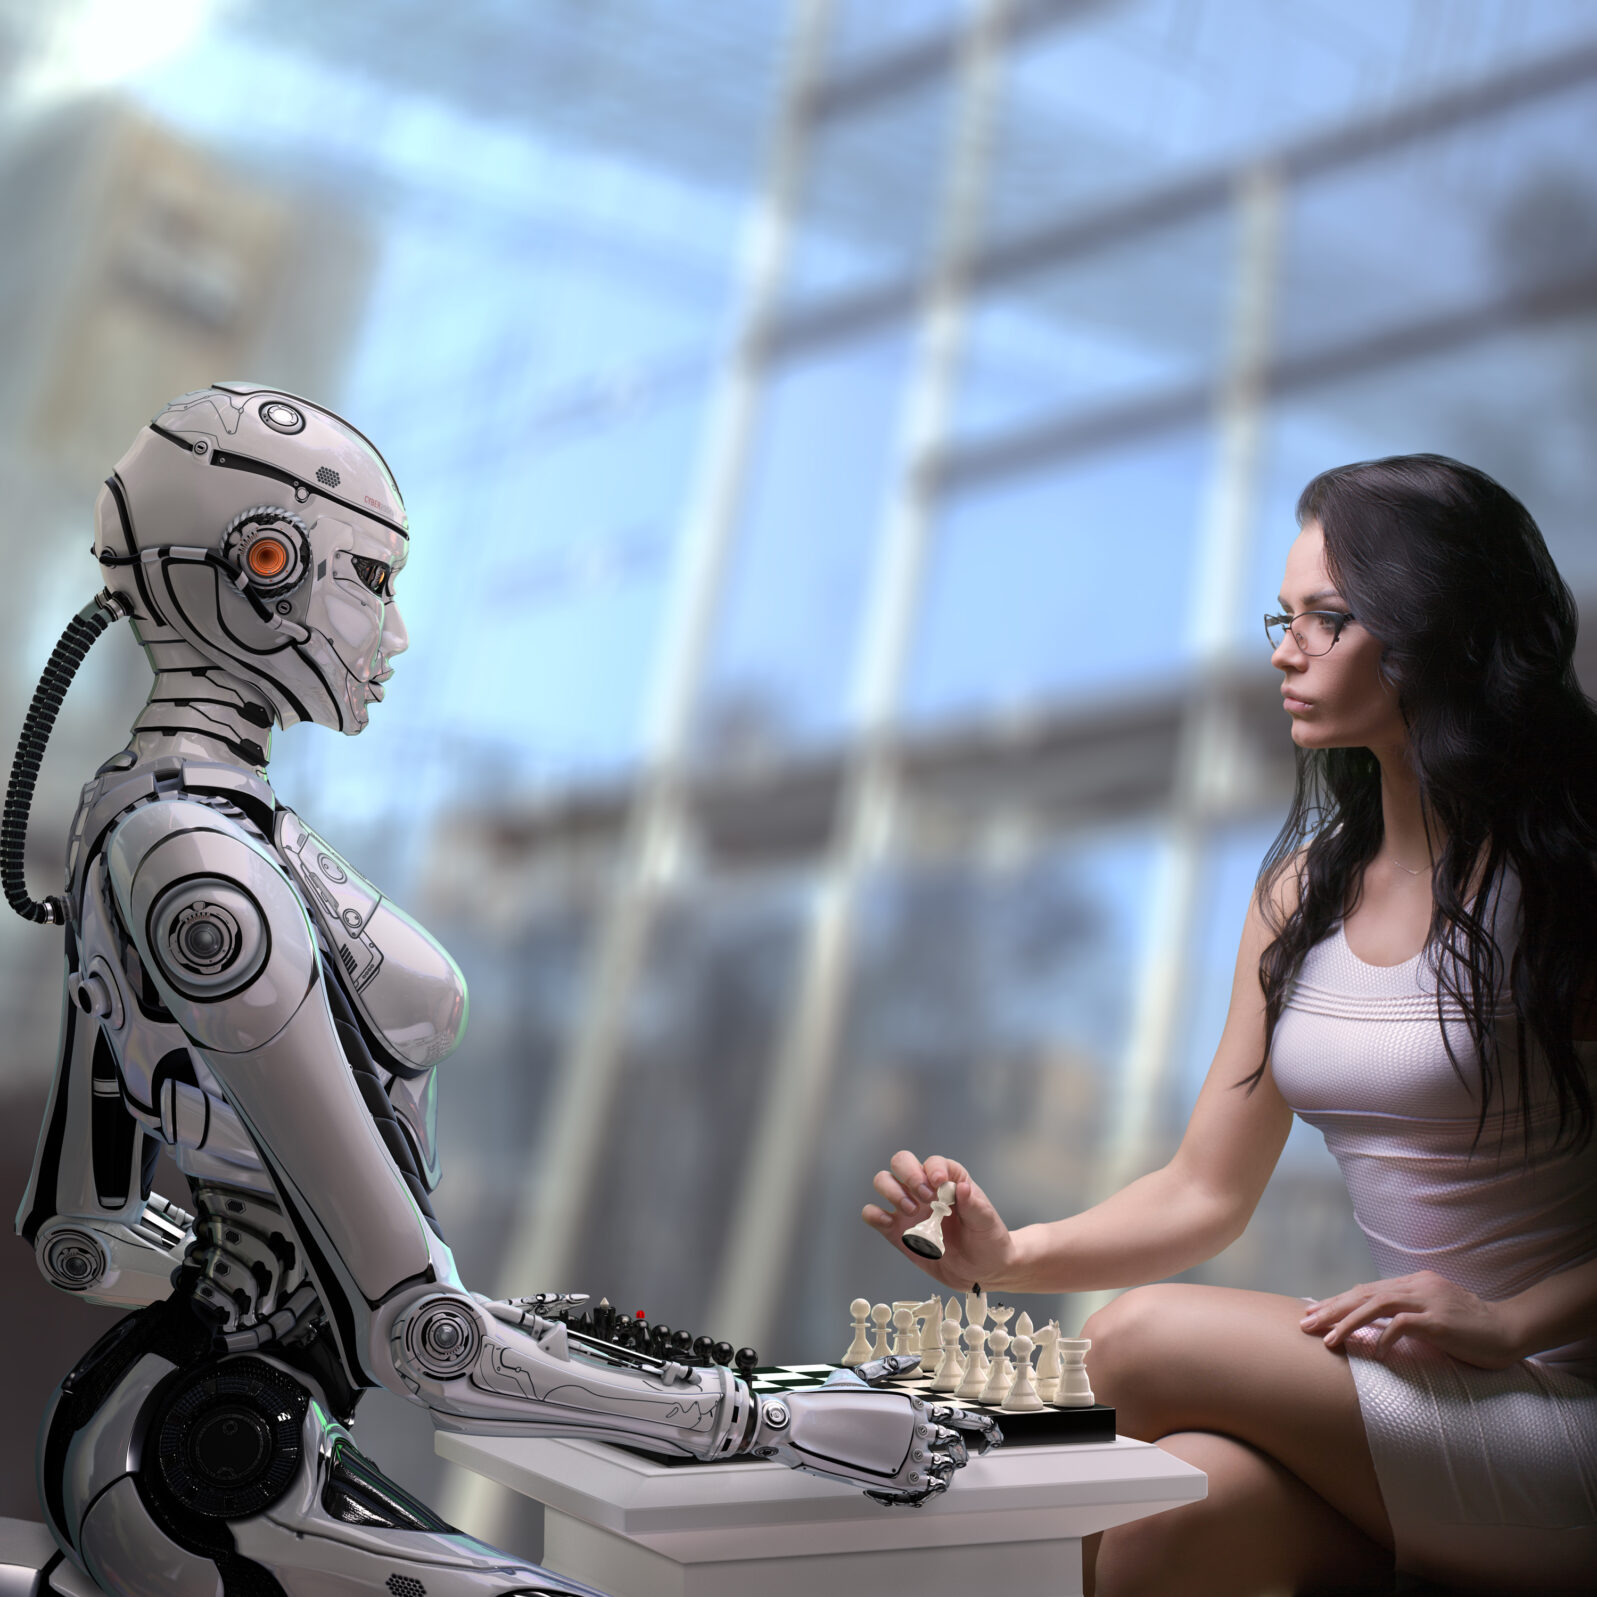 Fembot Robot Playing Chess with Woman